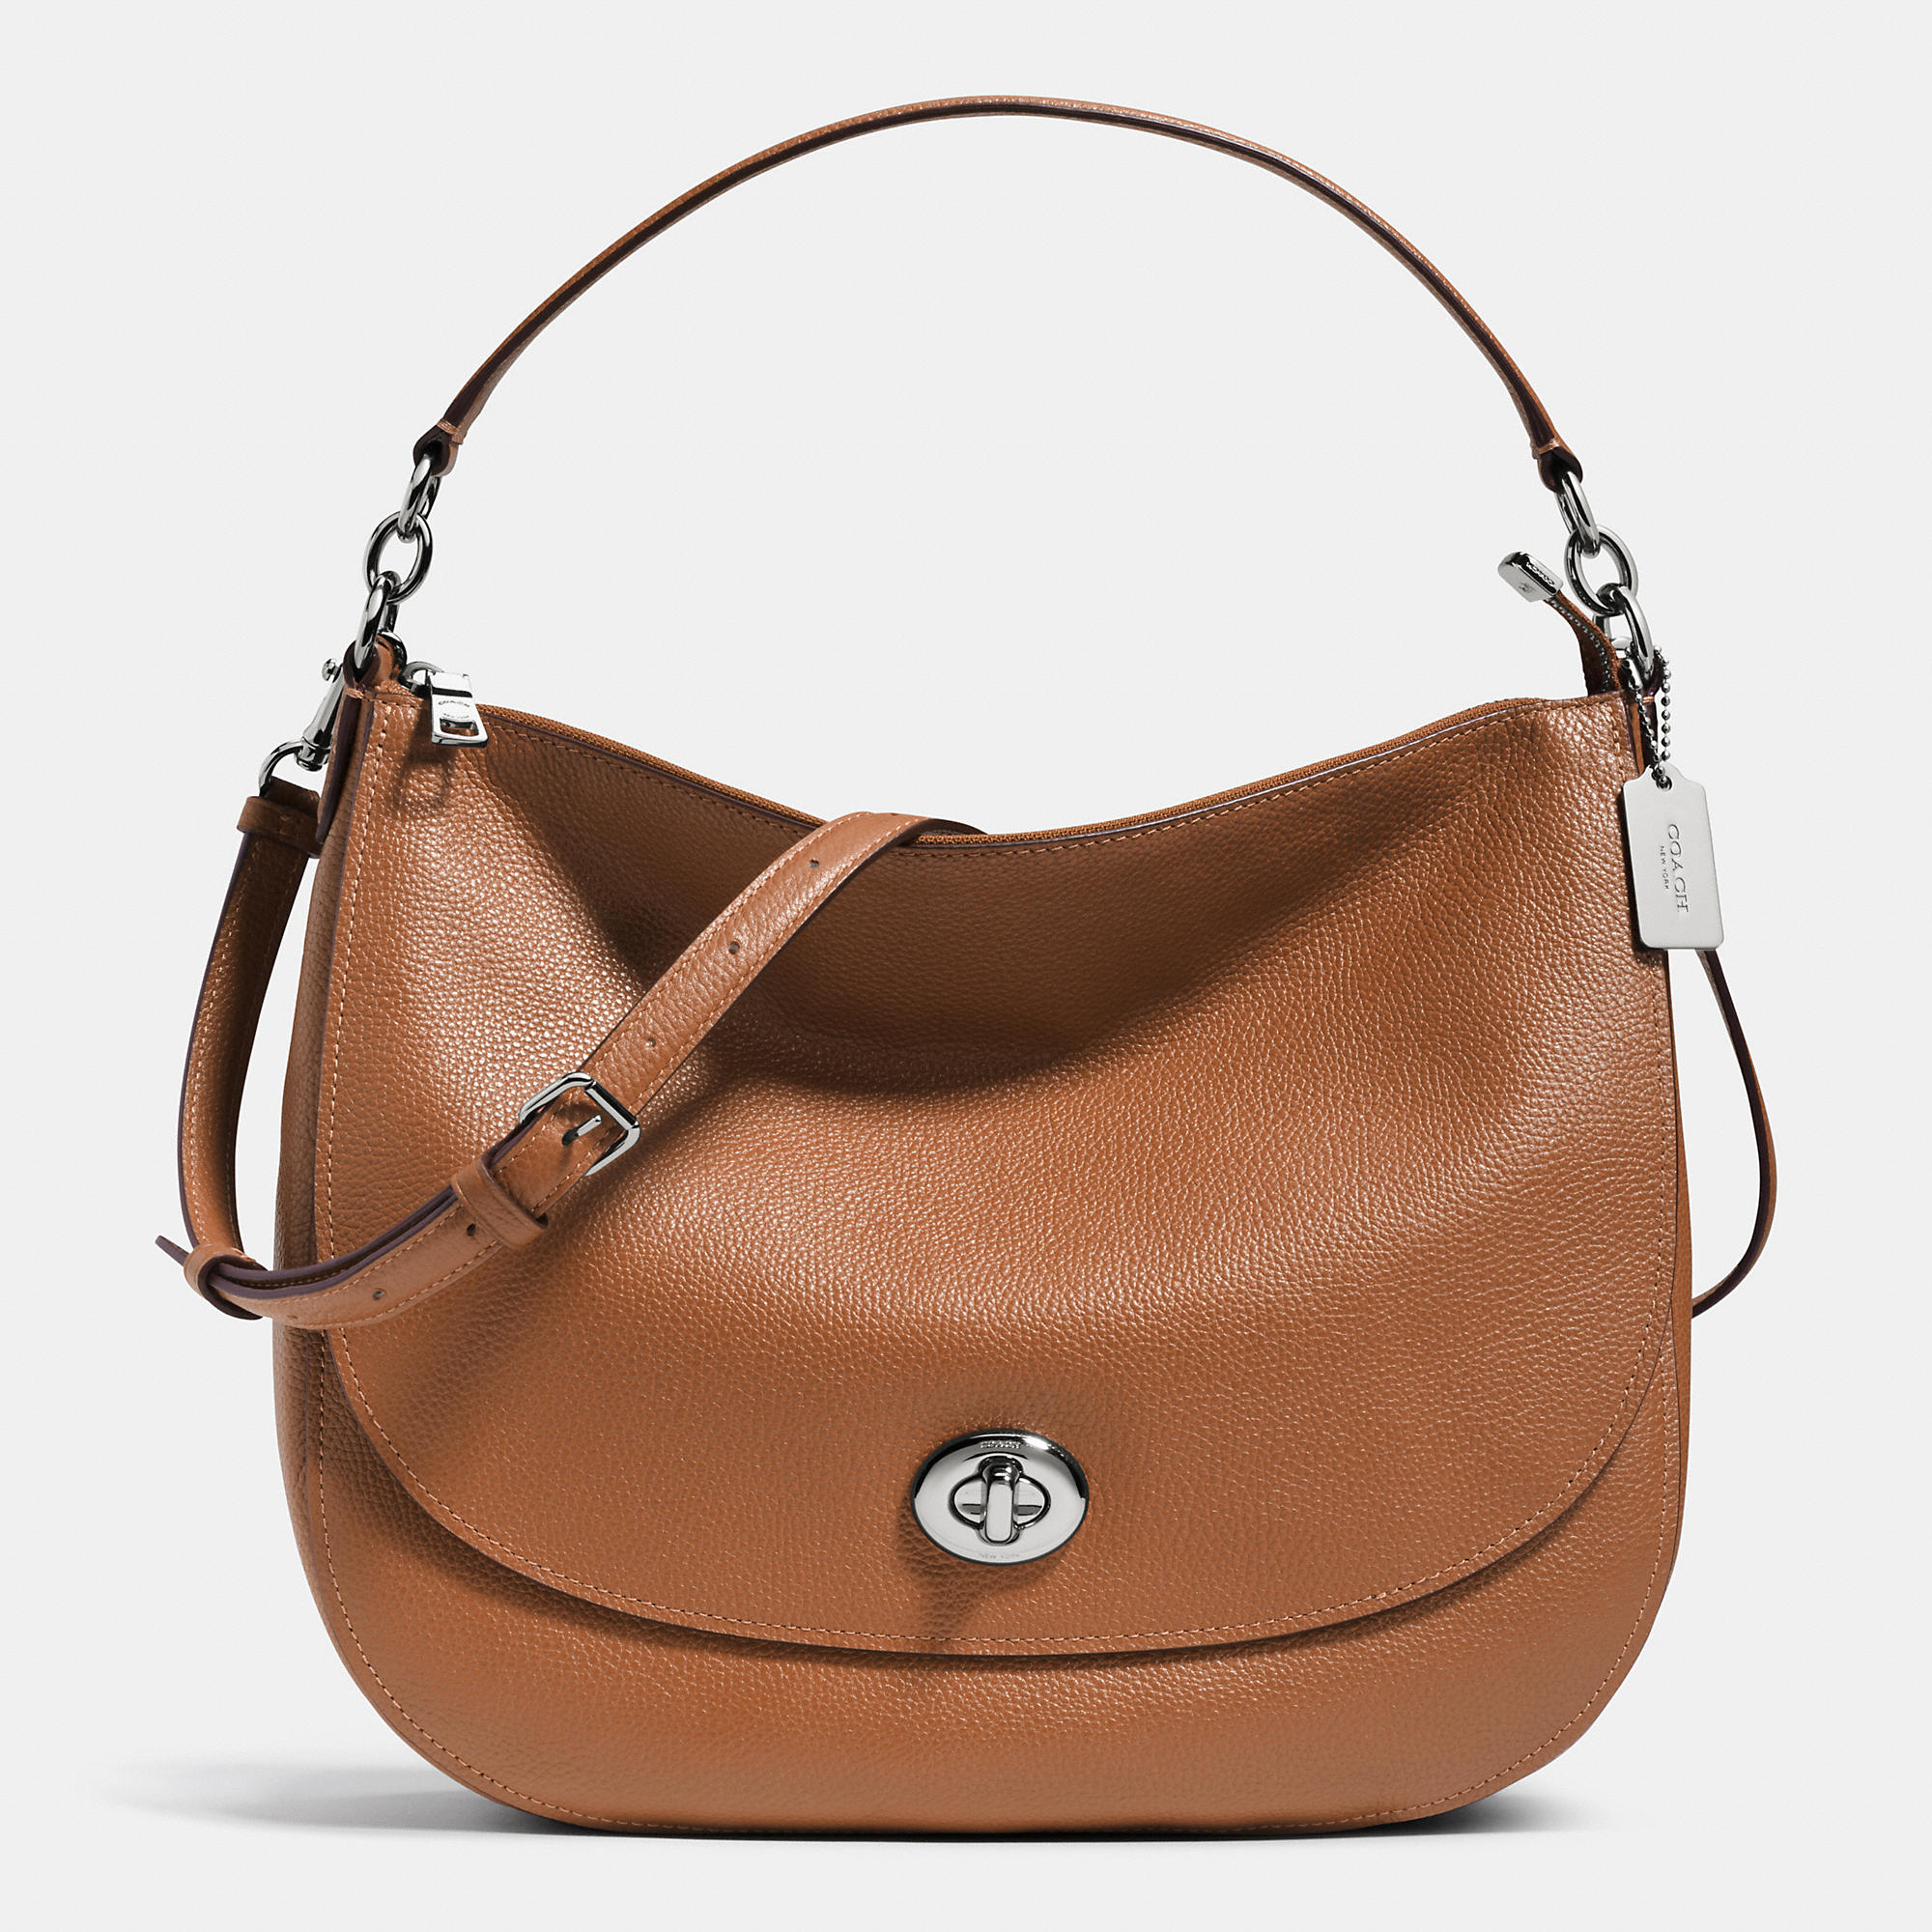 New Realer Coach Turnlock Hobo In Pebble Leather | Coach Outlet Canada